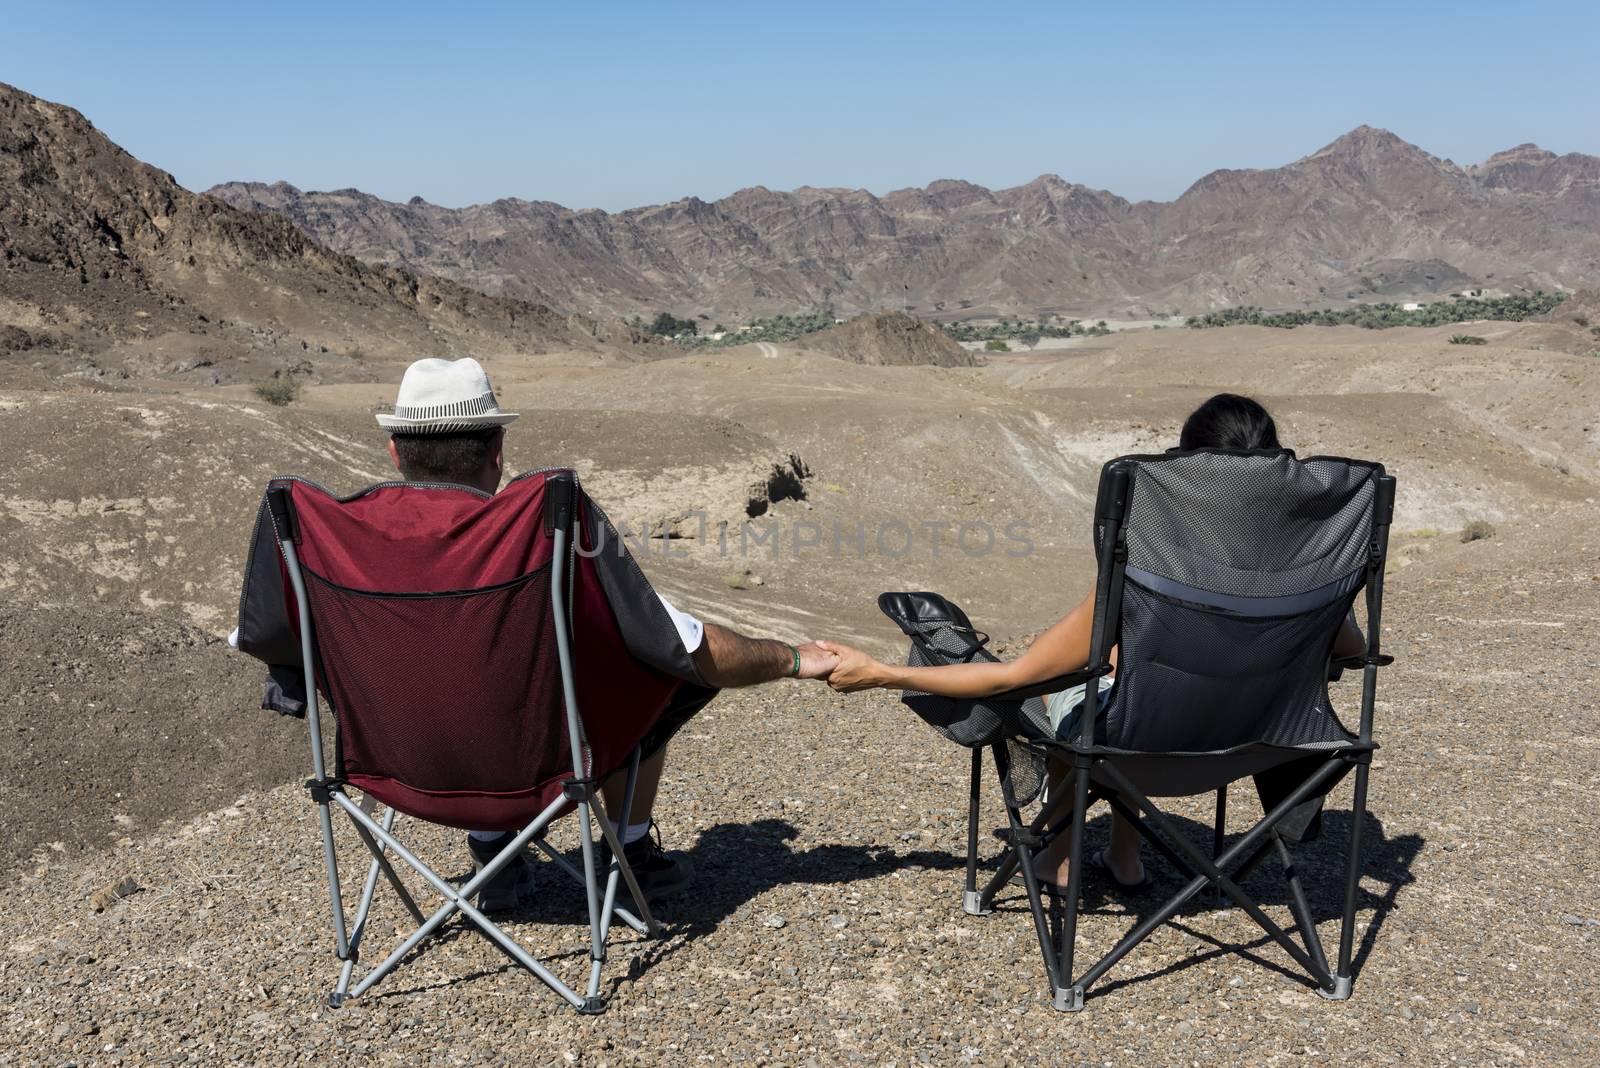 Couple in camping chairs over-looking a Wadi, mountains, in The United Arab Emirates